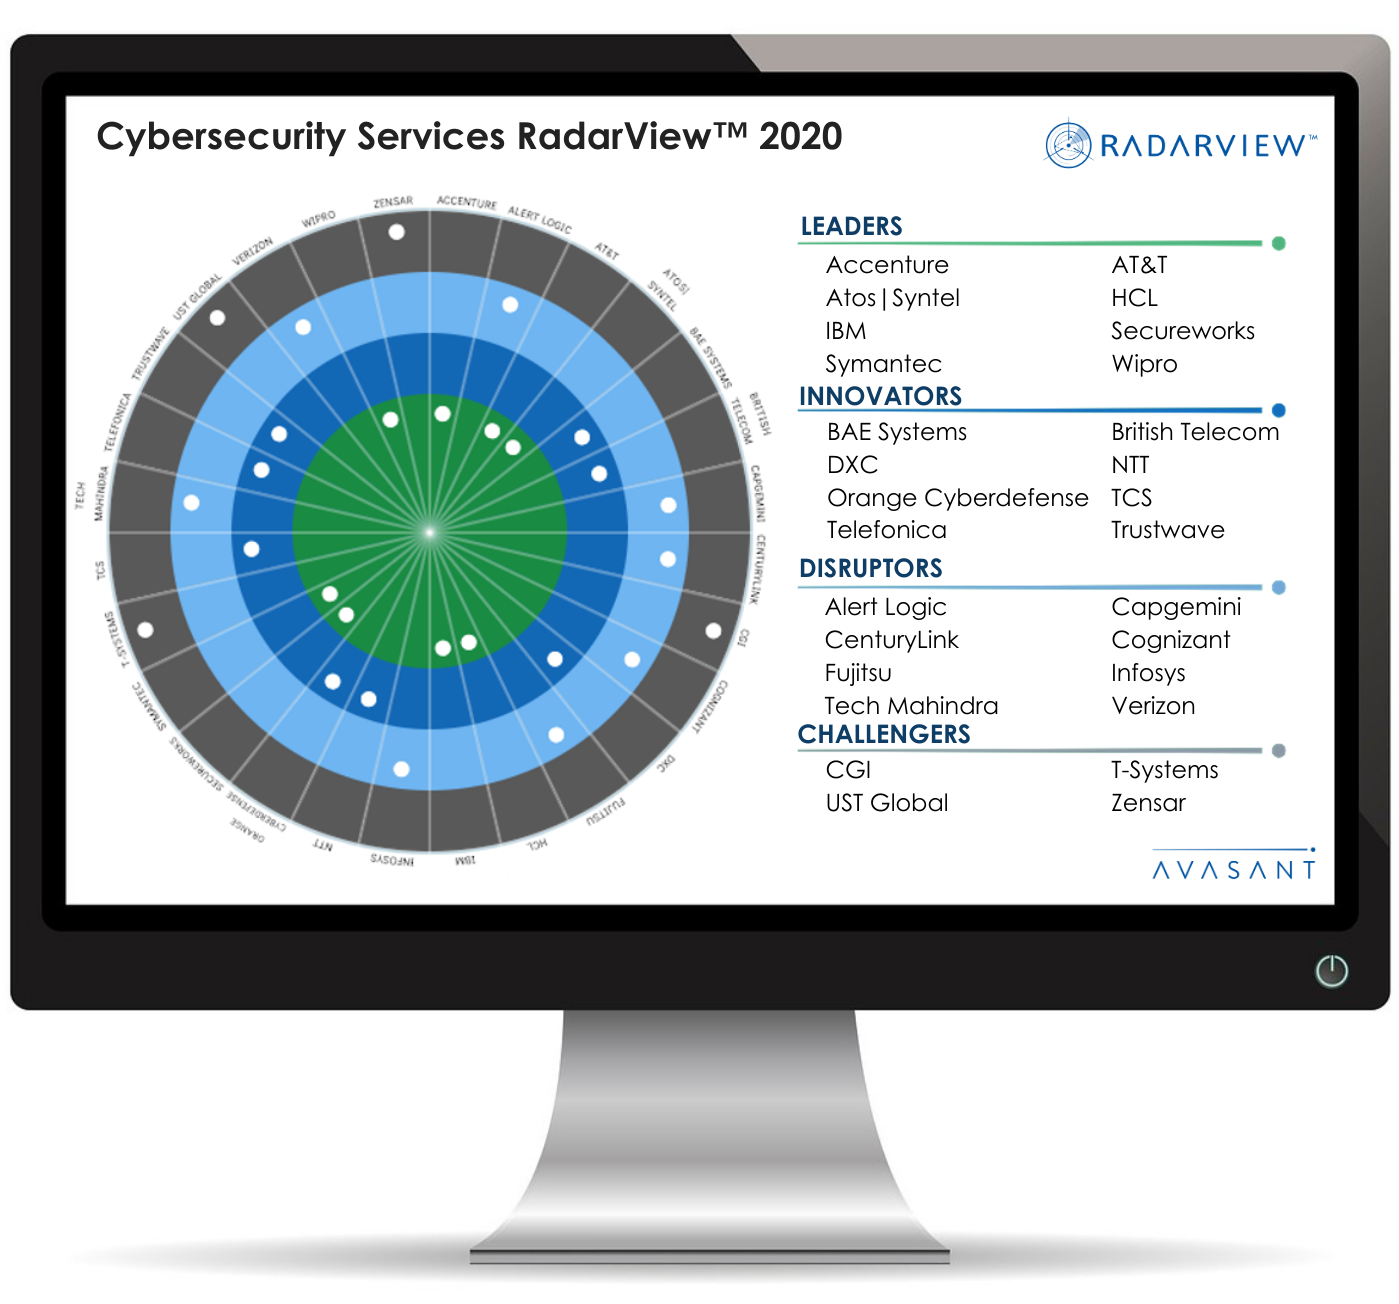 Cybersecurity RV 1 1 - Cybersecurity Services RadarView™ 2020 - Verizon